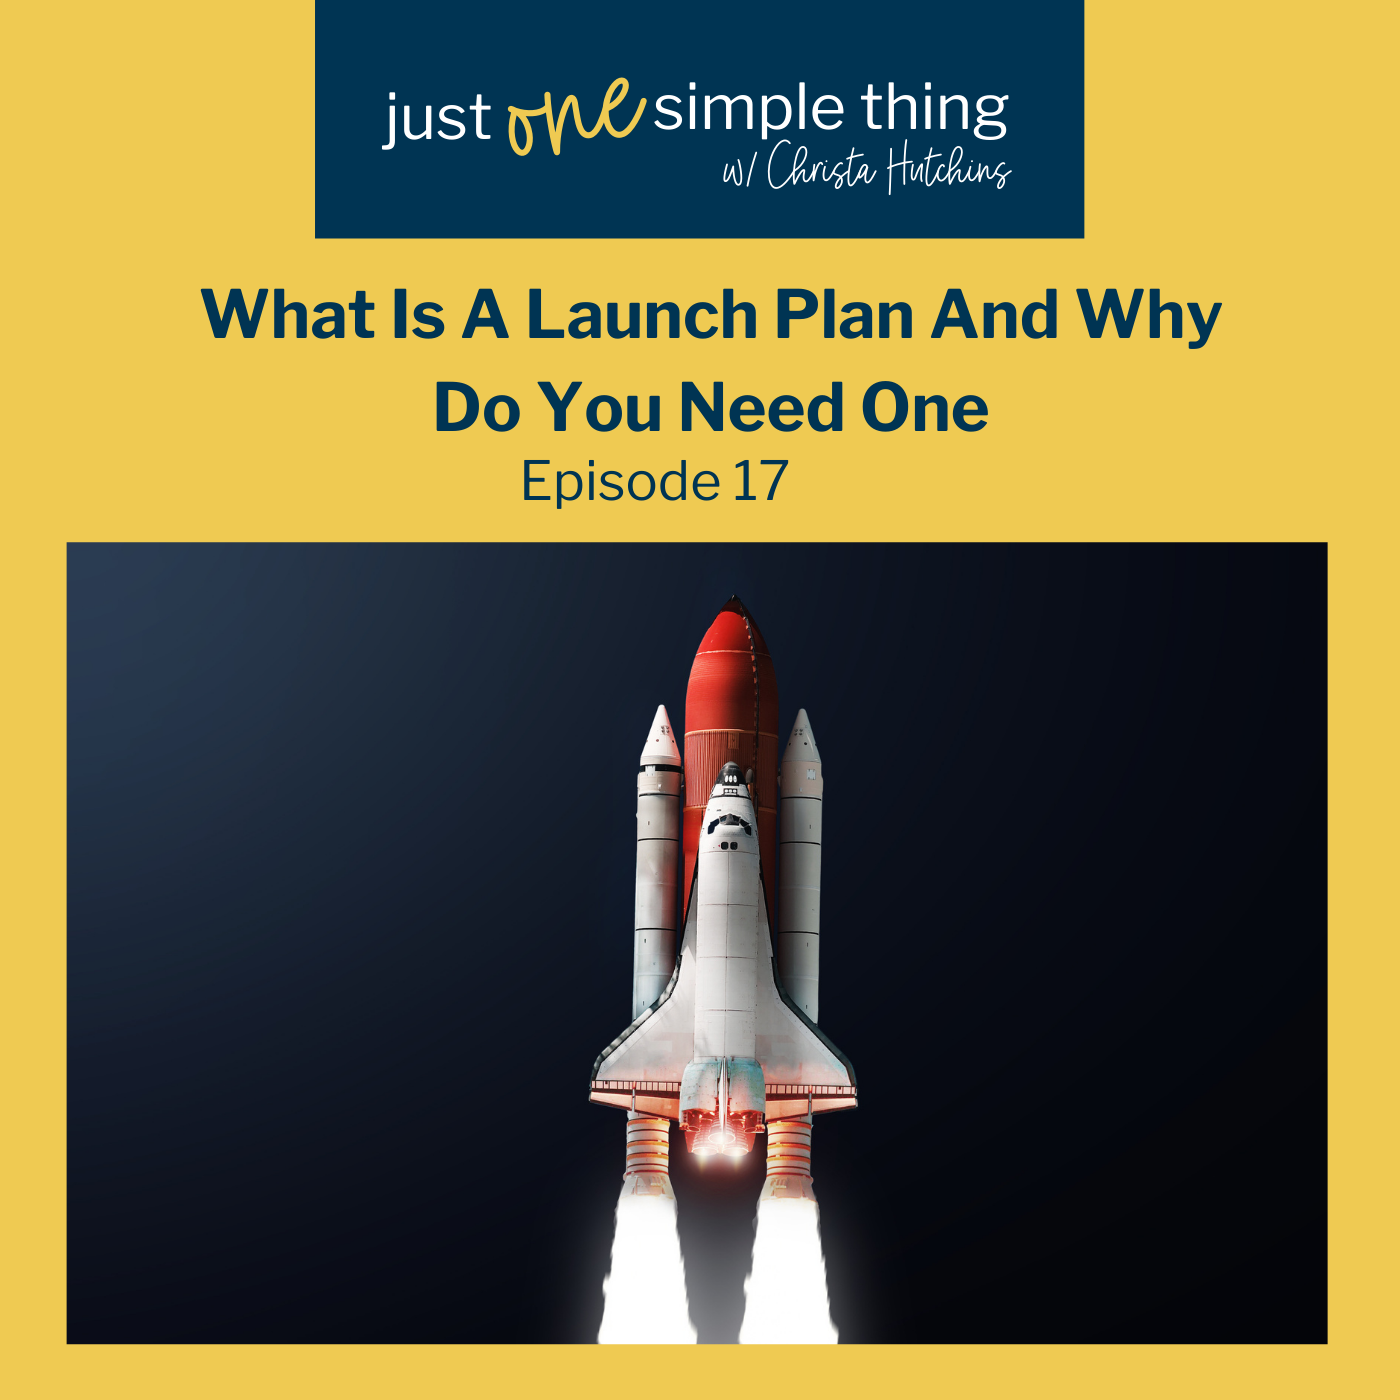 What is a Launch Plan and Why Do You Need One?